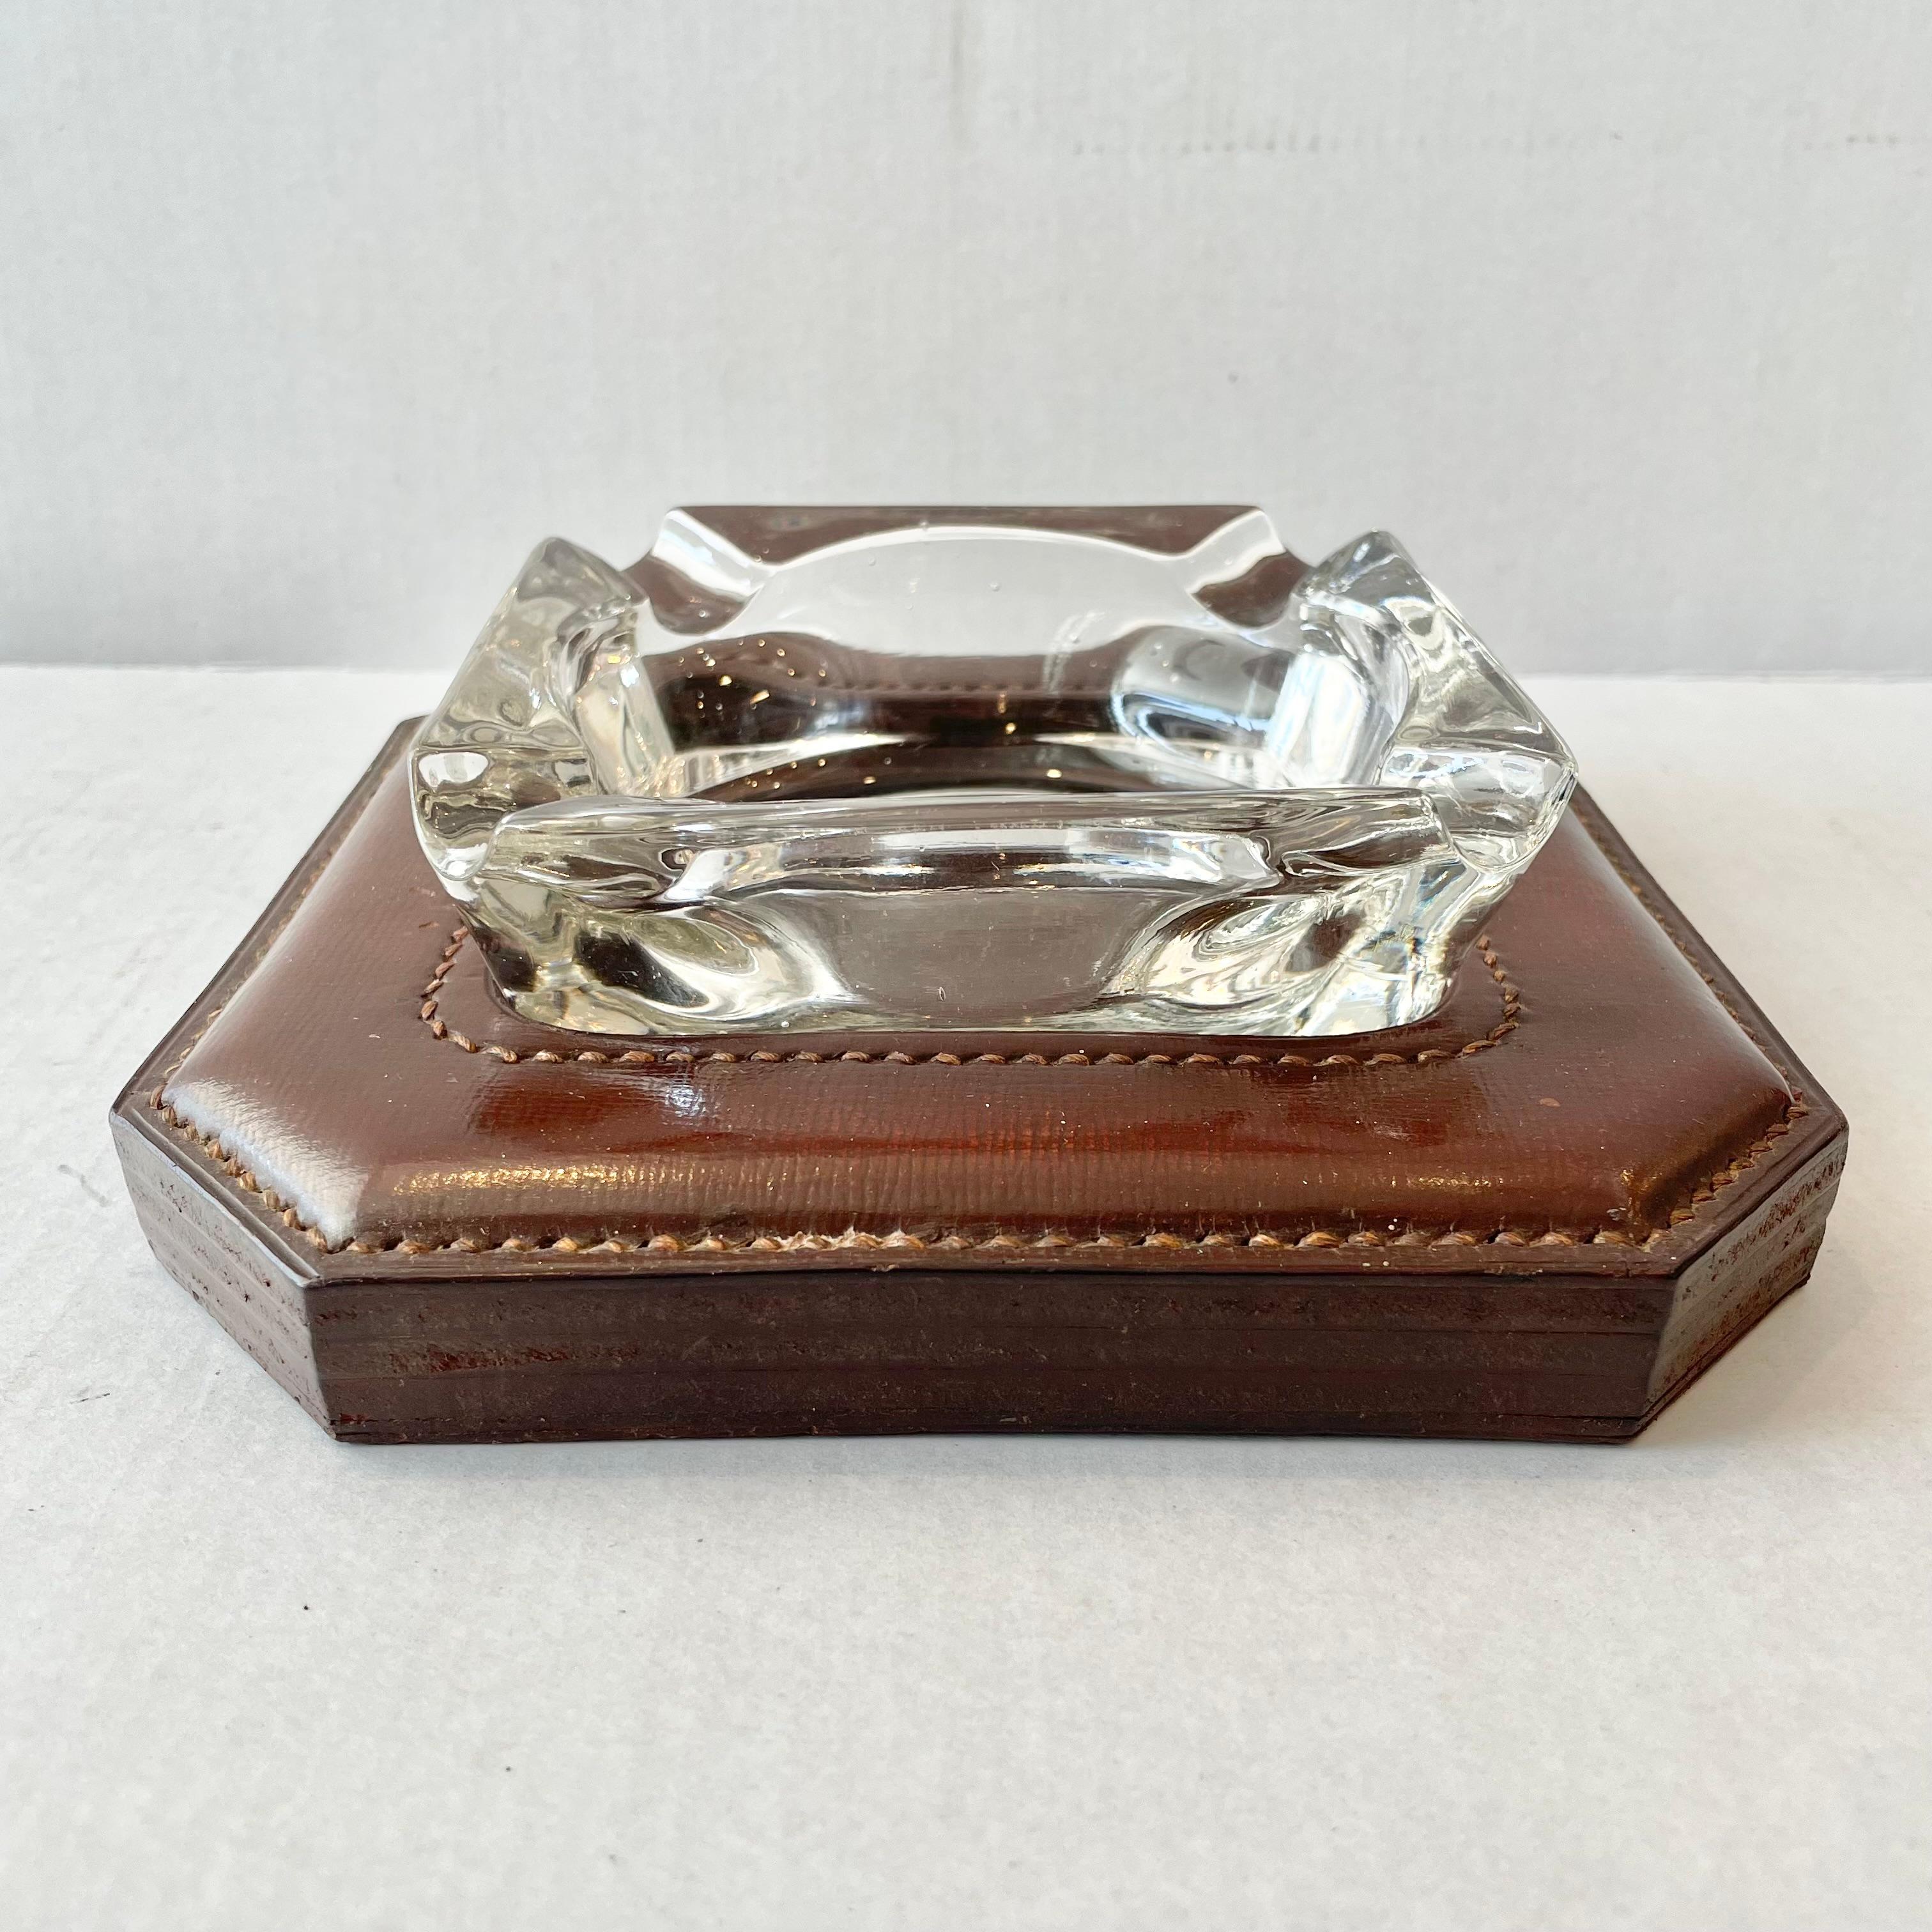 Classic leather and glass catchall / ashtray by French designer Jacques Adnet. Rich cognac leather base with signature Adnet contrast stitching and a circular inset cutout. Crystal glass with circular base sits nicely inside with four cigarette